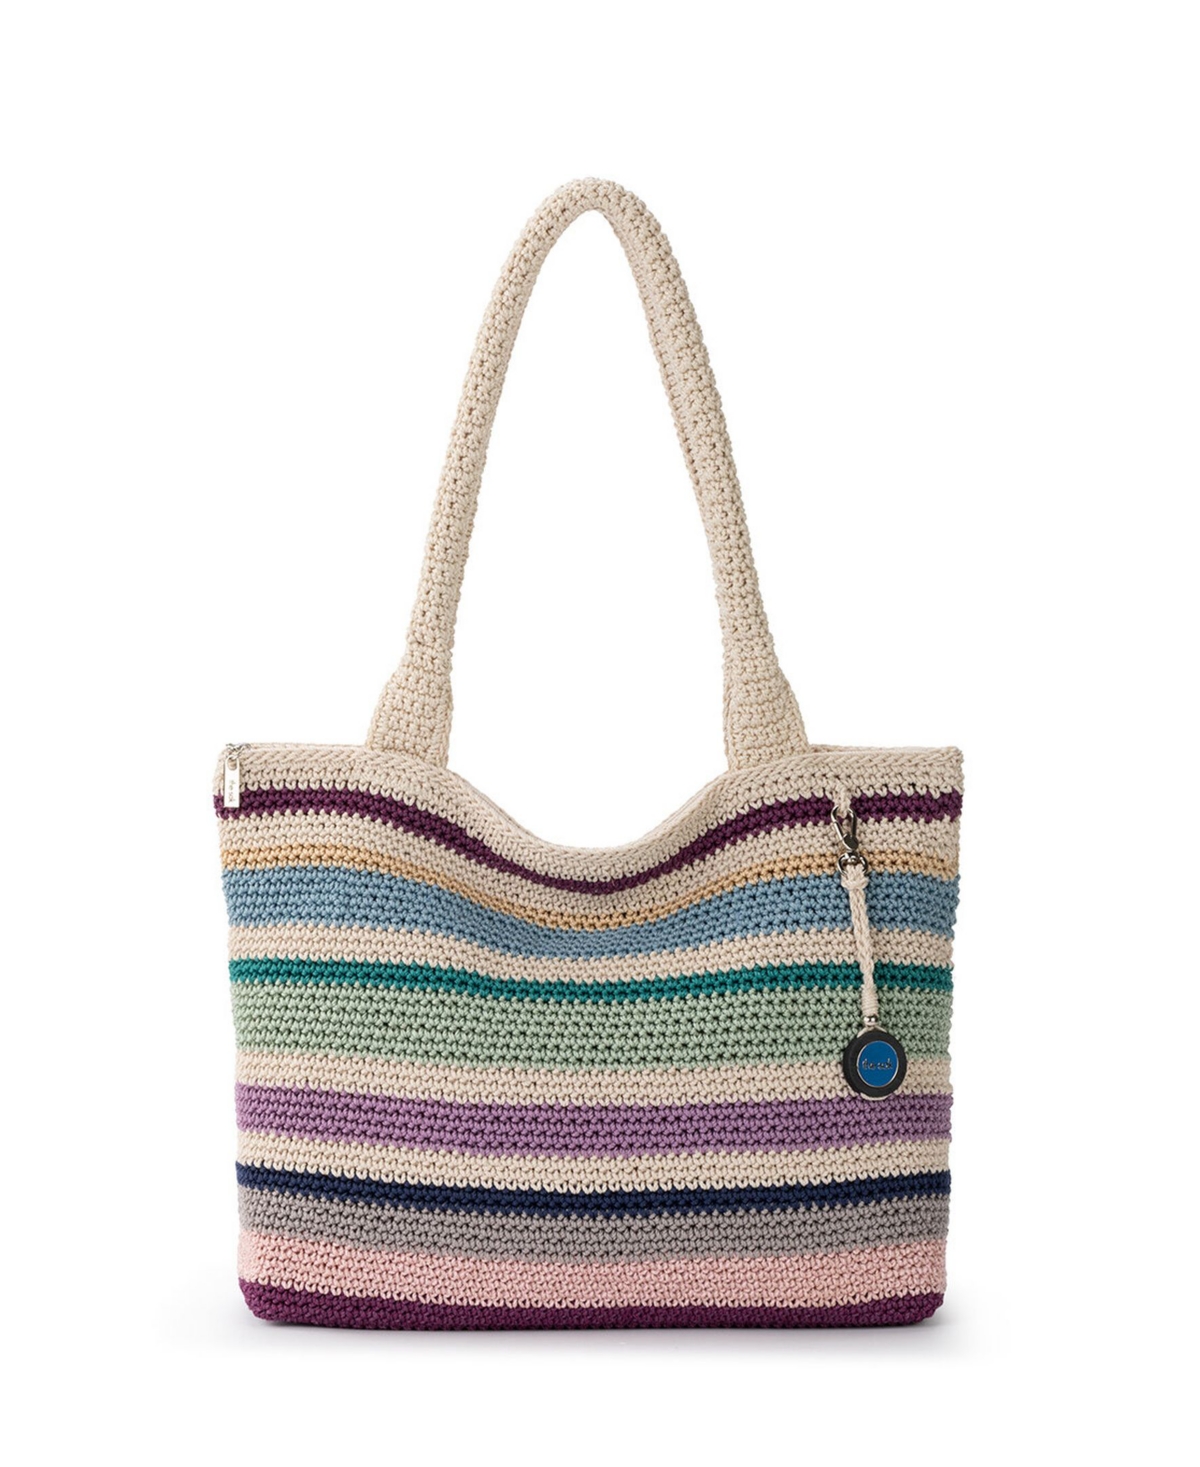 Women's Crafted Classics Crochet Carryall Tote In Mendocino Stripe